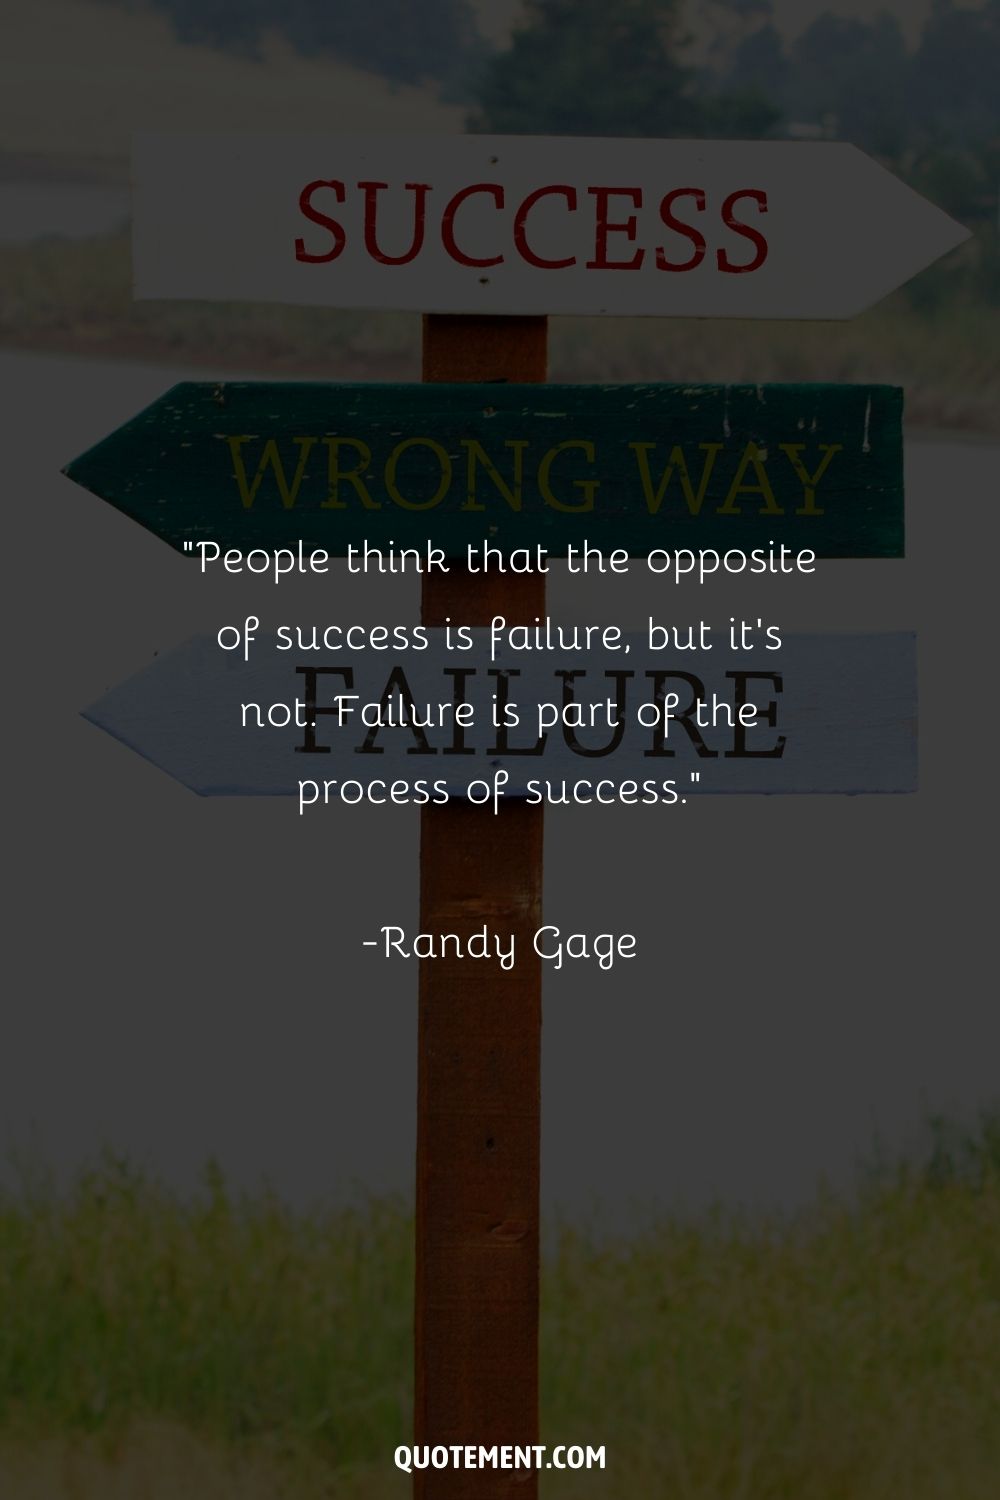 “People think that the opposite of success is failure, but it's not. Failure is part of the process of success.” ― Randy Gage